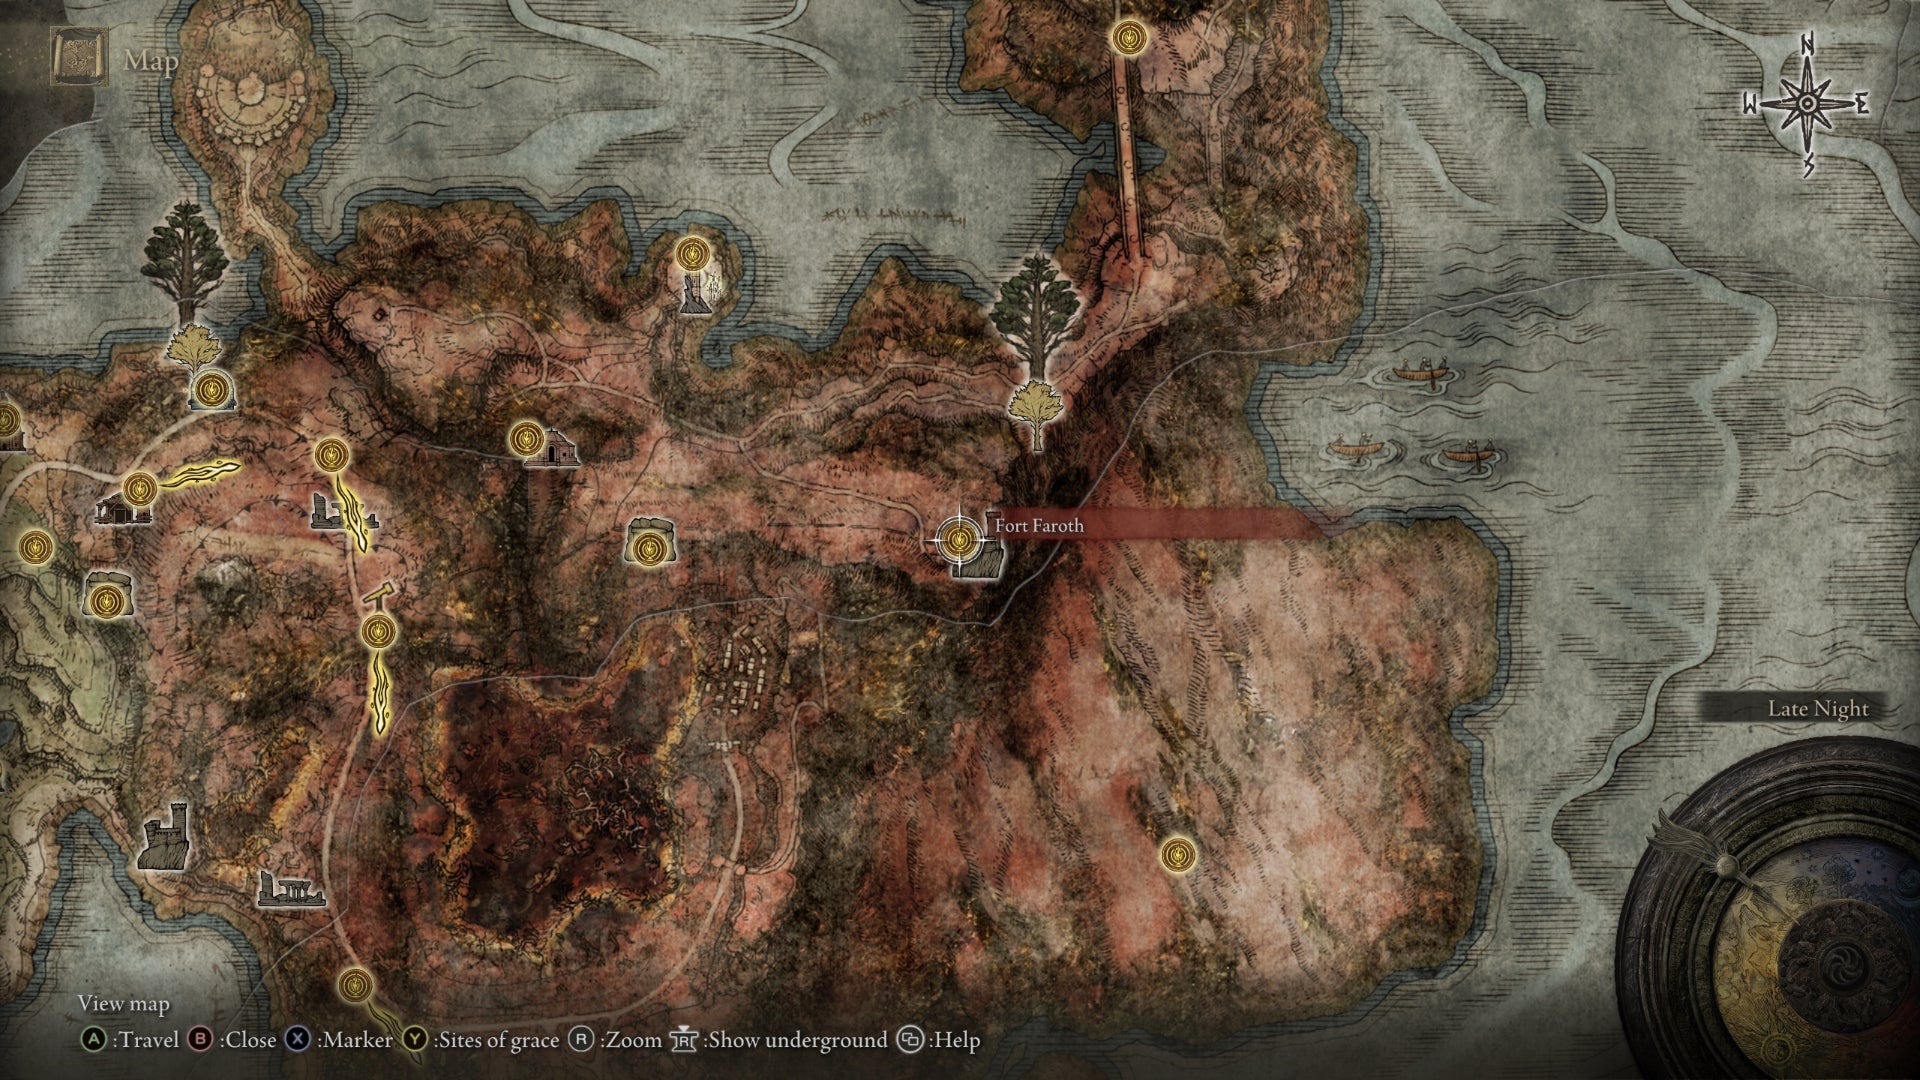 Part of the Elden Ring map, with the location of Fort Faroth marked.